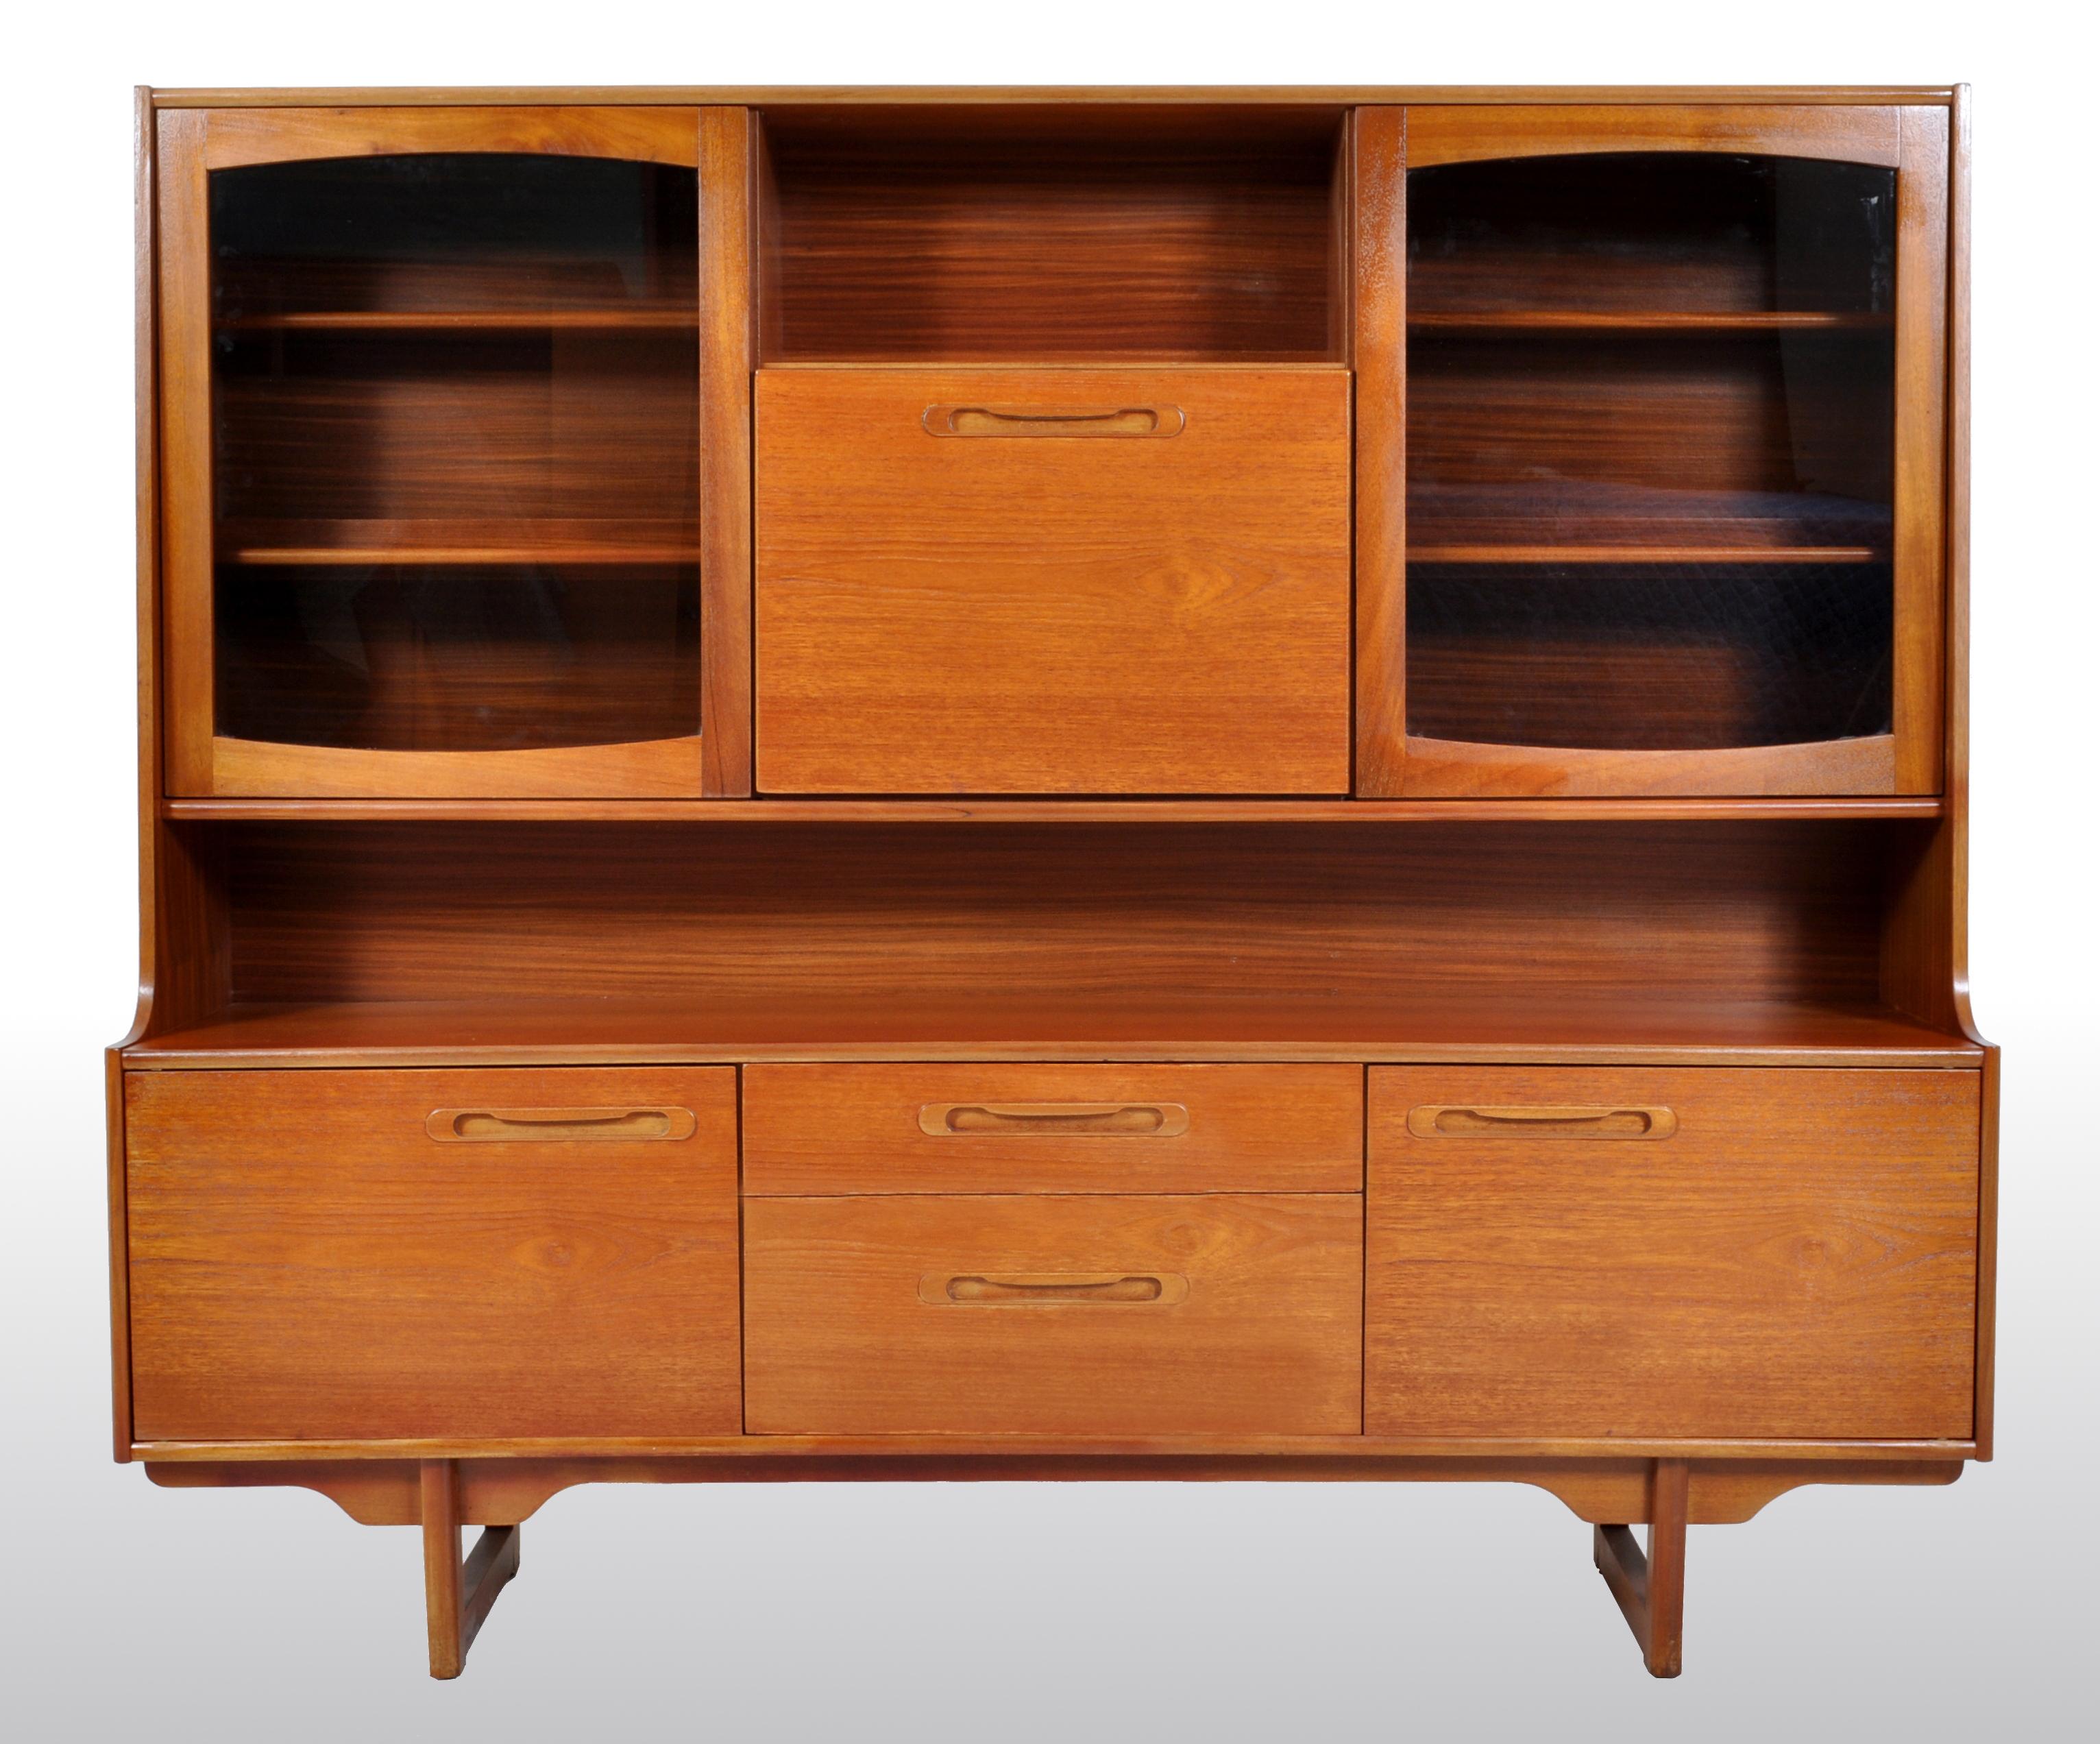 English Mid-Century Modern Danish Style Twin Tier Credenza in Teak by Portwood, 1960s